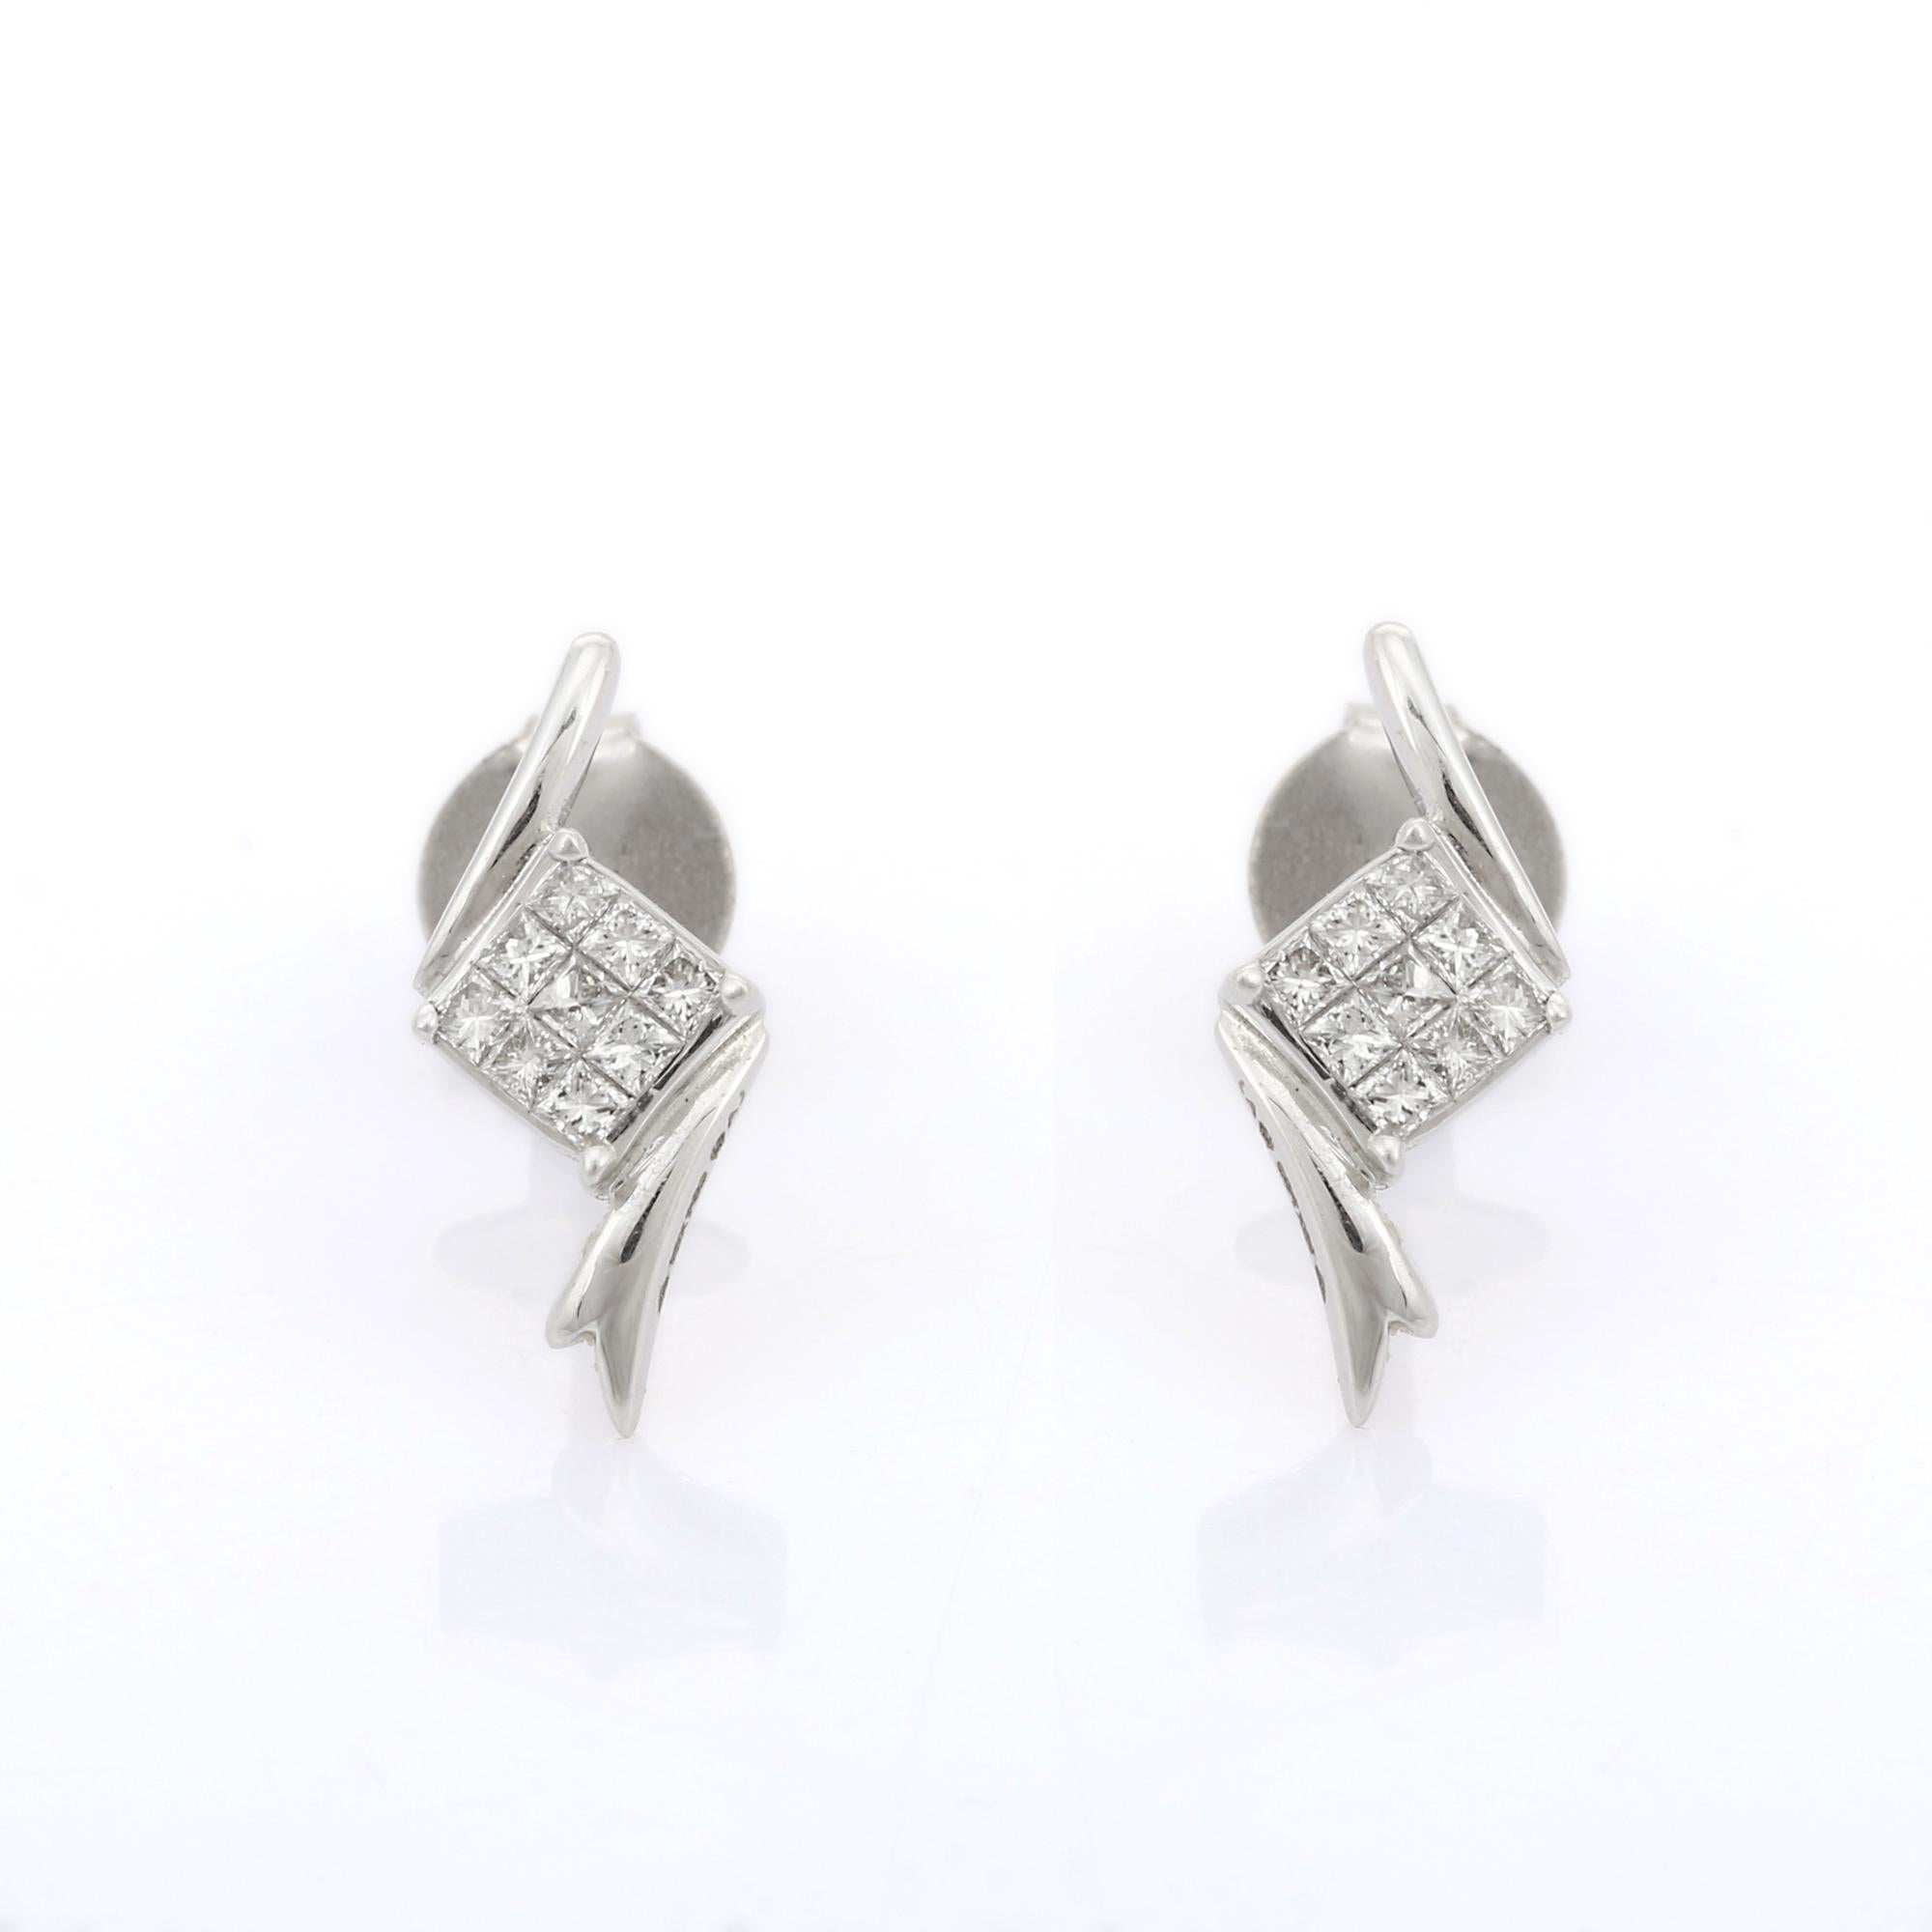 Women's 18K Solid White Gold Square Cut Natural Diamond Stud Earrings For Her For Sale